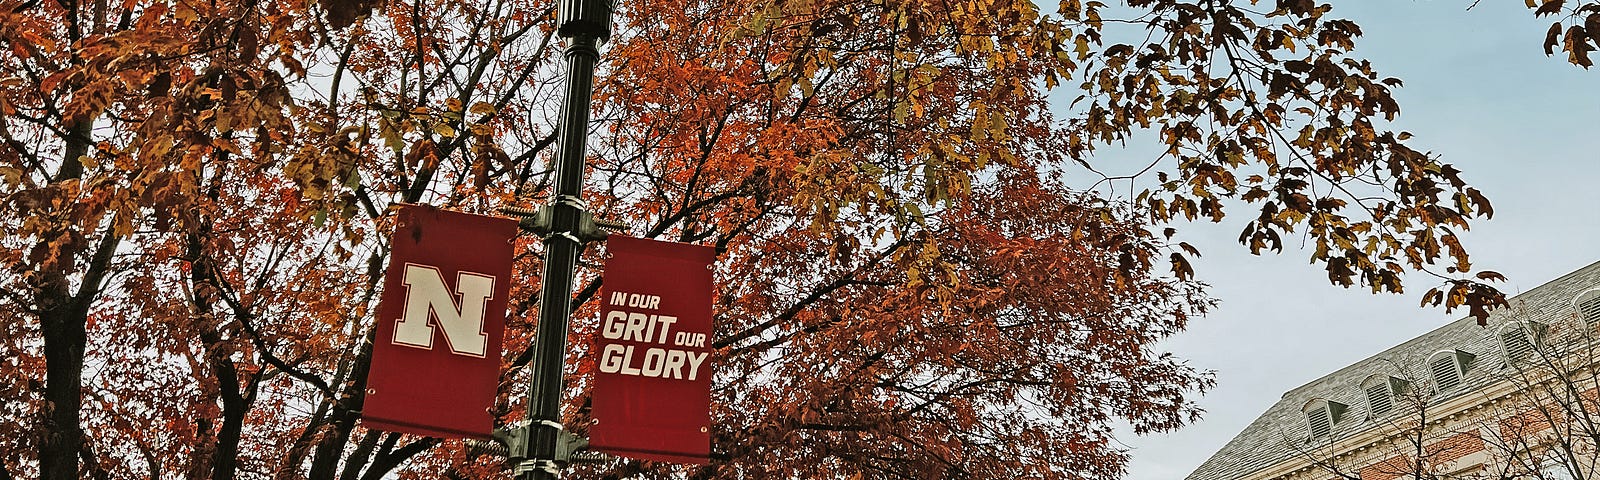 A banner outside the union says “In Our Grit, Our Glory”